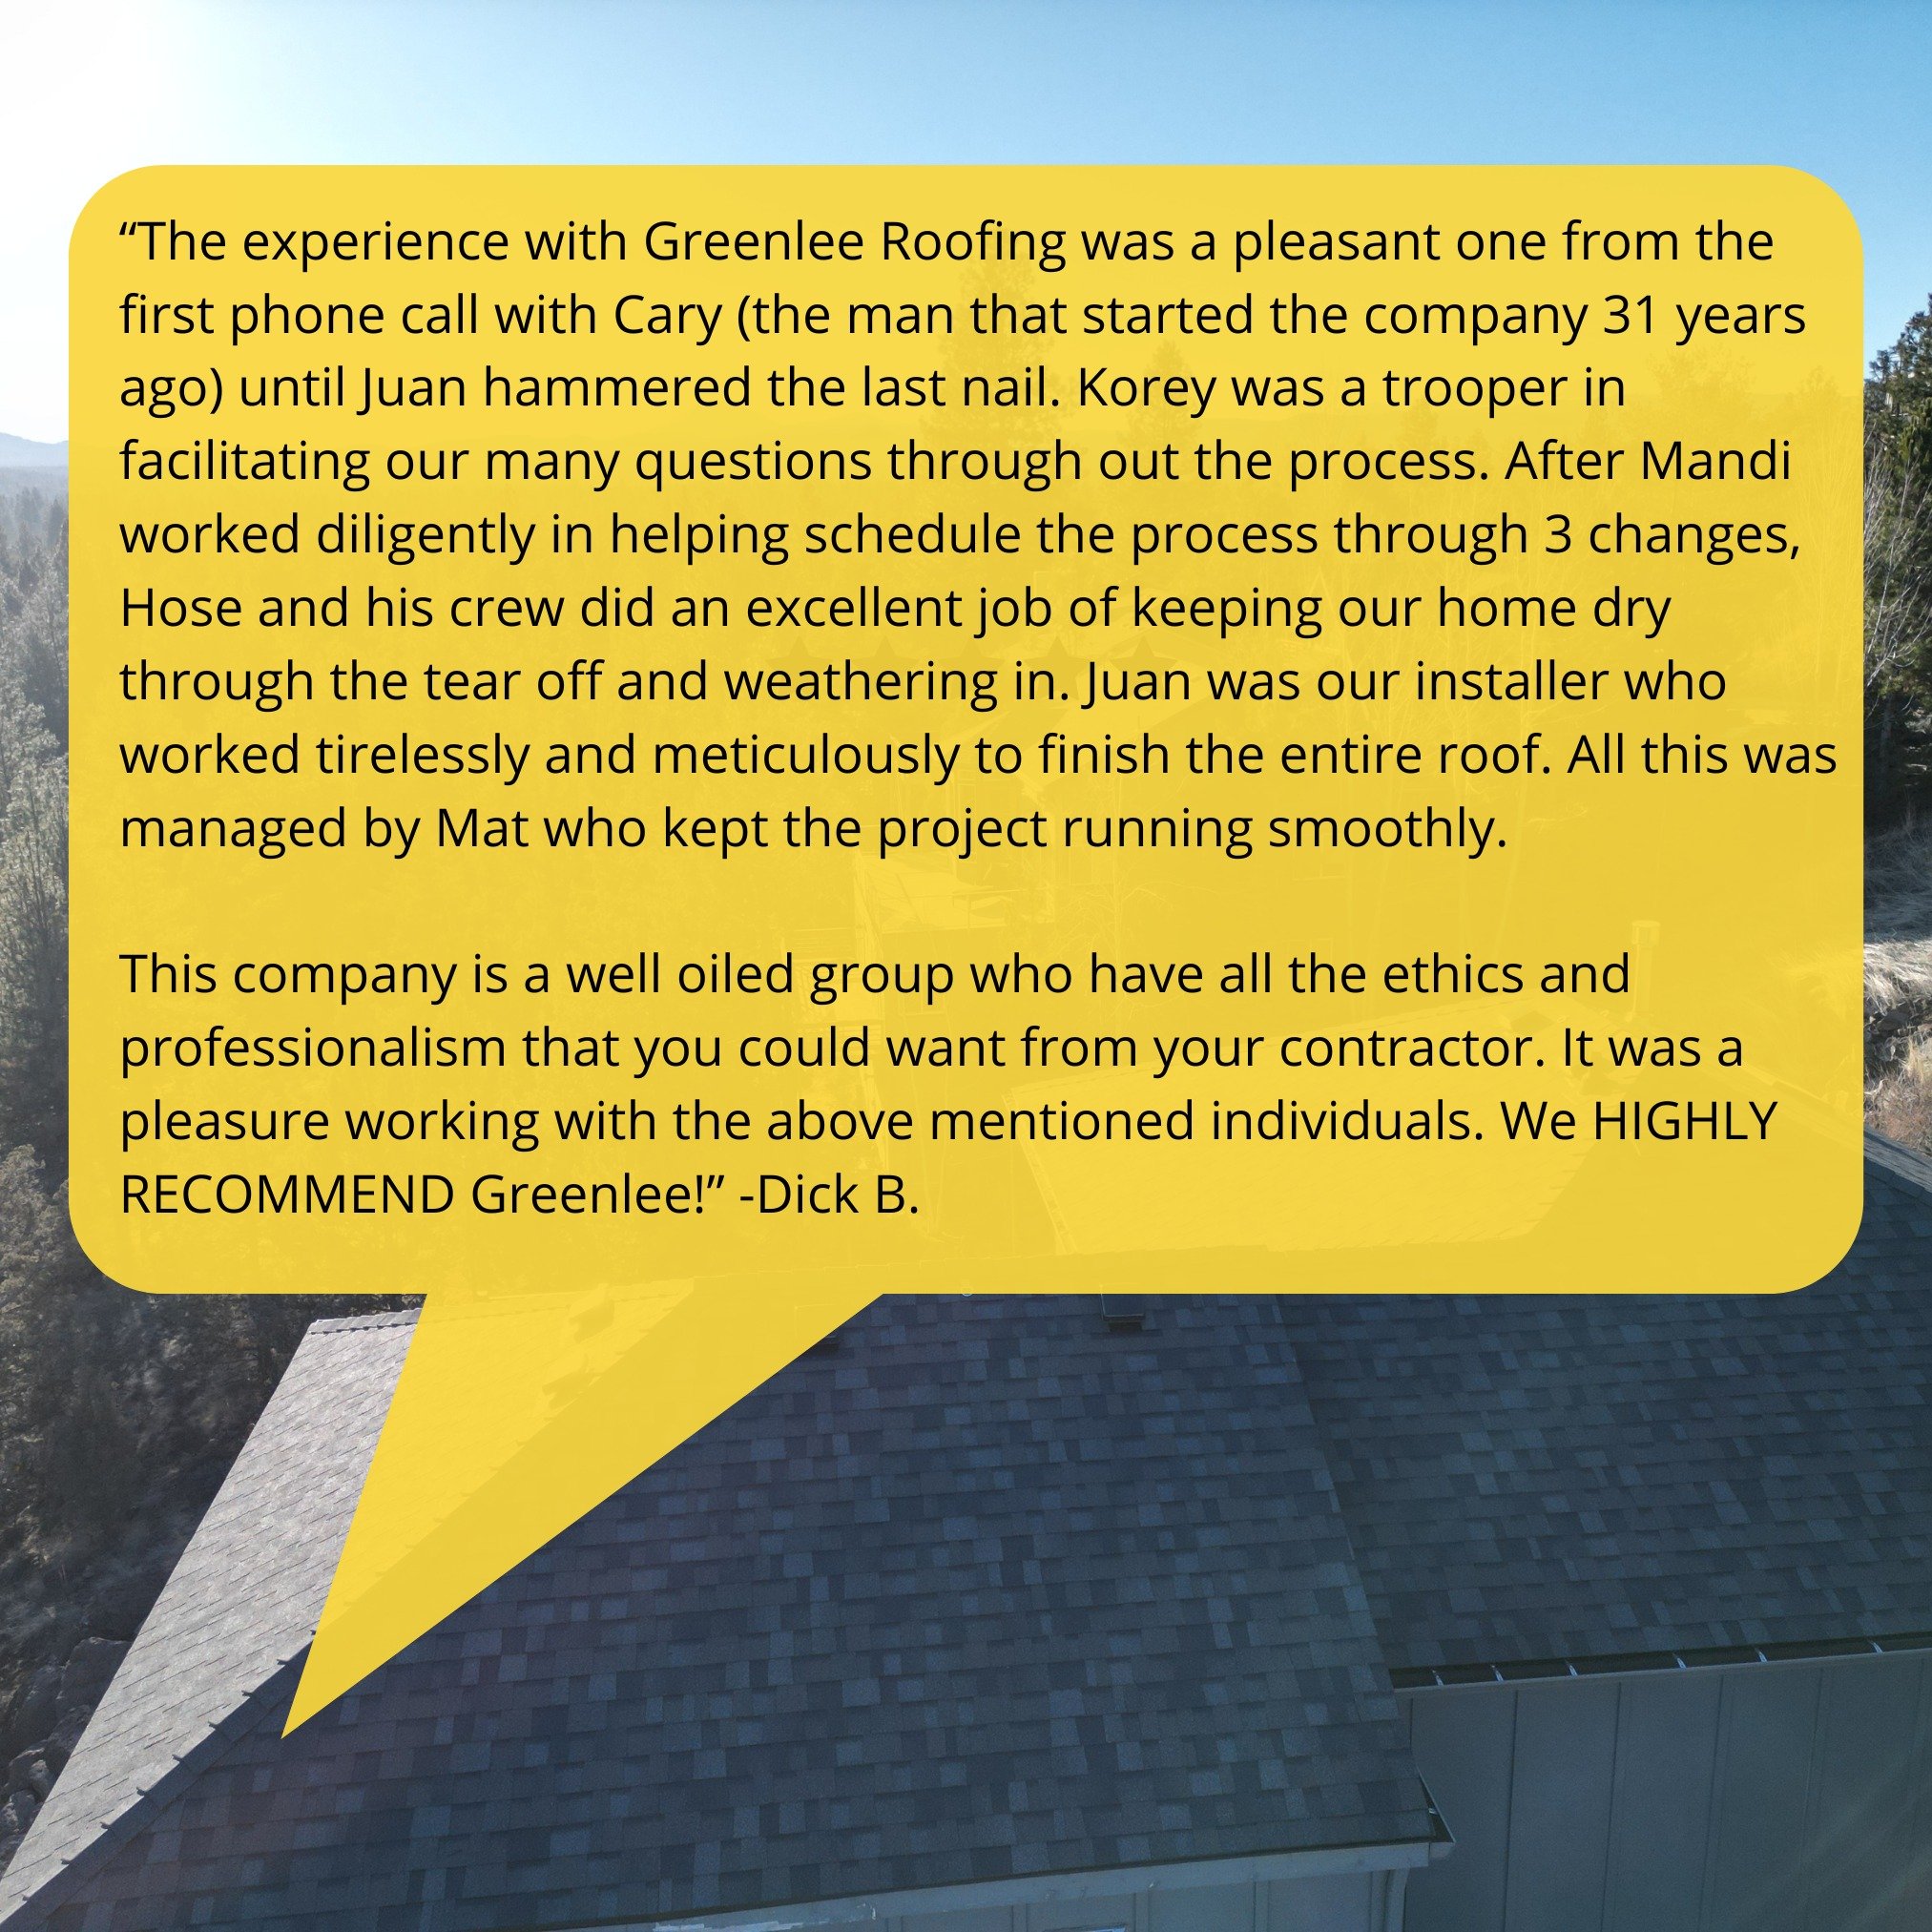 With over 150 Google Reviews see why our customers are choosing Greenlee for all their roofing needs!